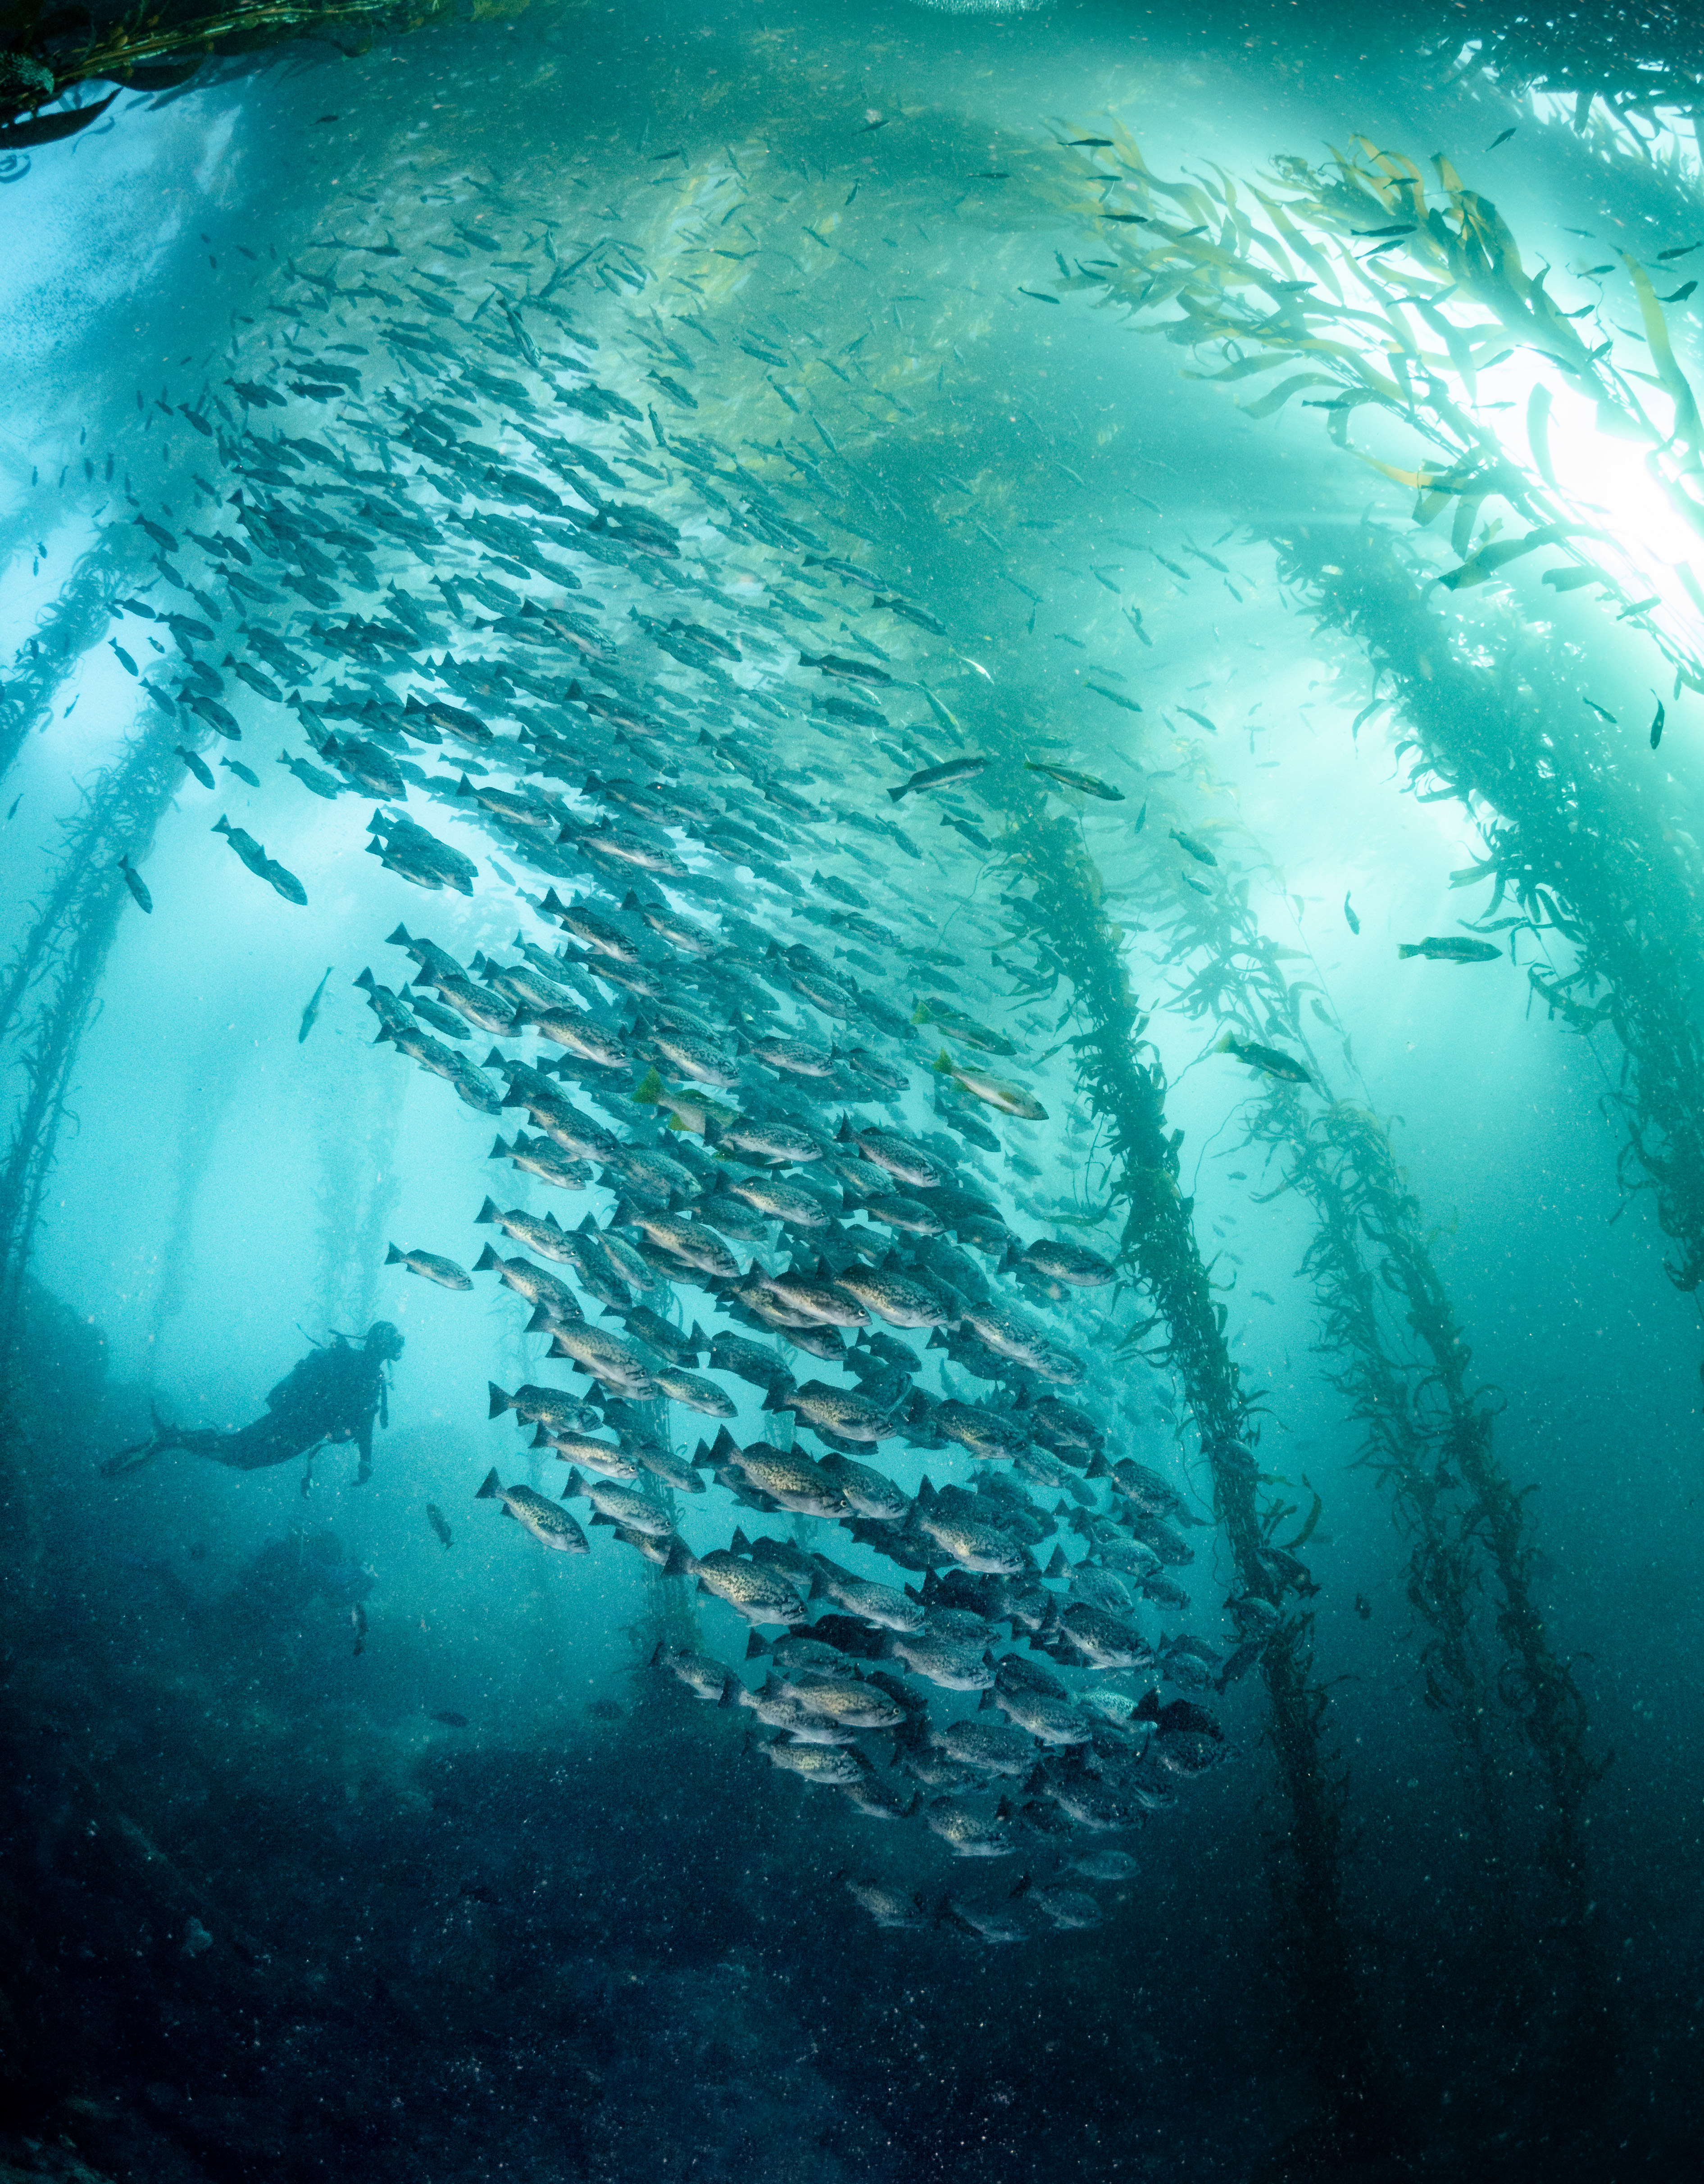 A large group of fish swimming in an underwater kelp forest